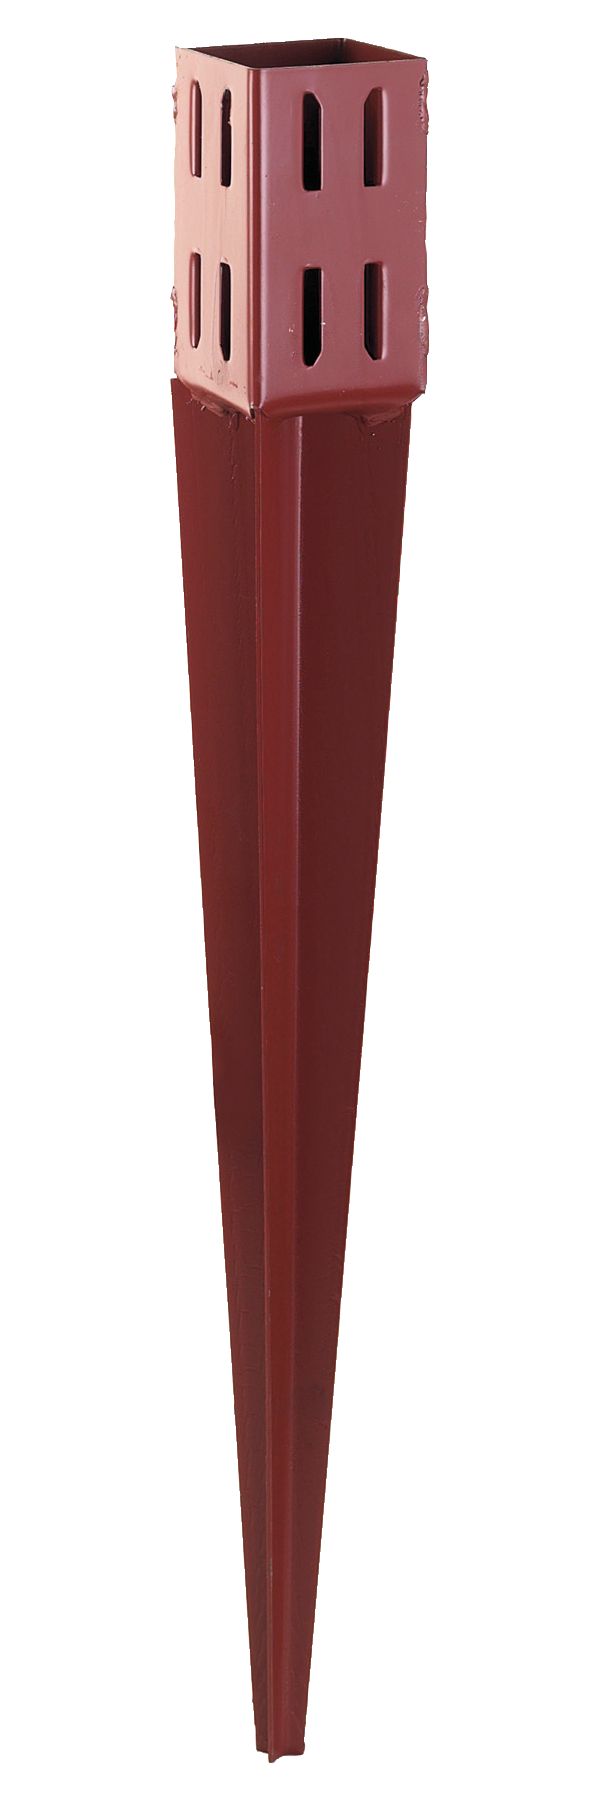 Wickes Wedge 750mm Support Spike for Fence Posts - 75 x 75mm